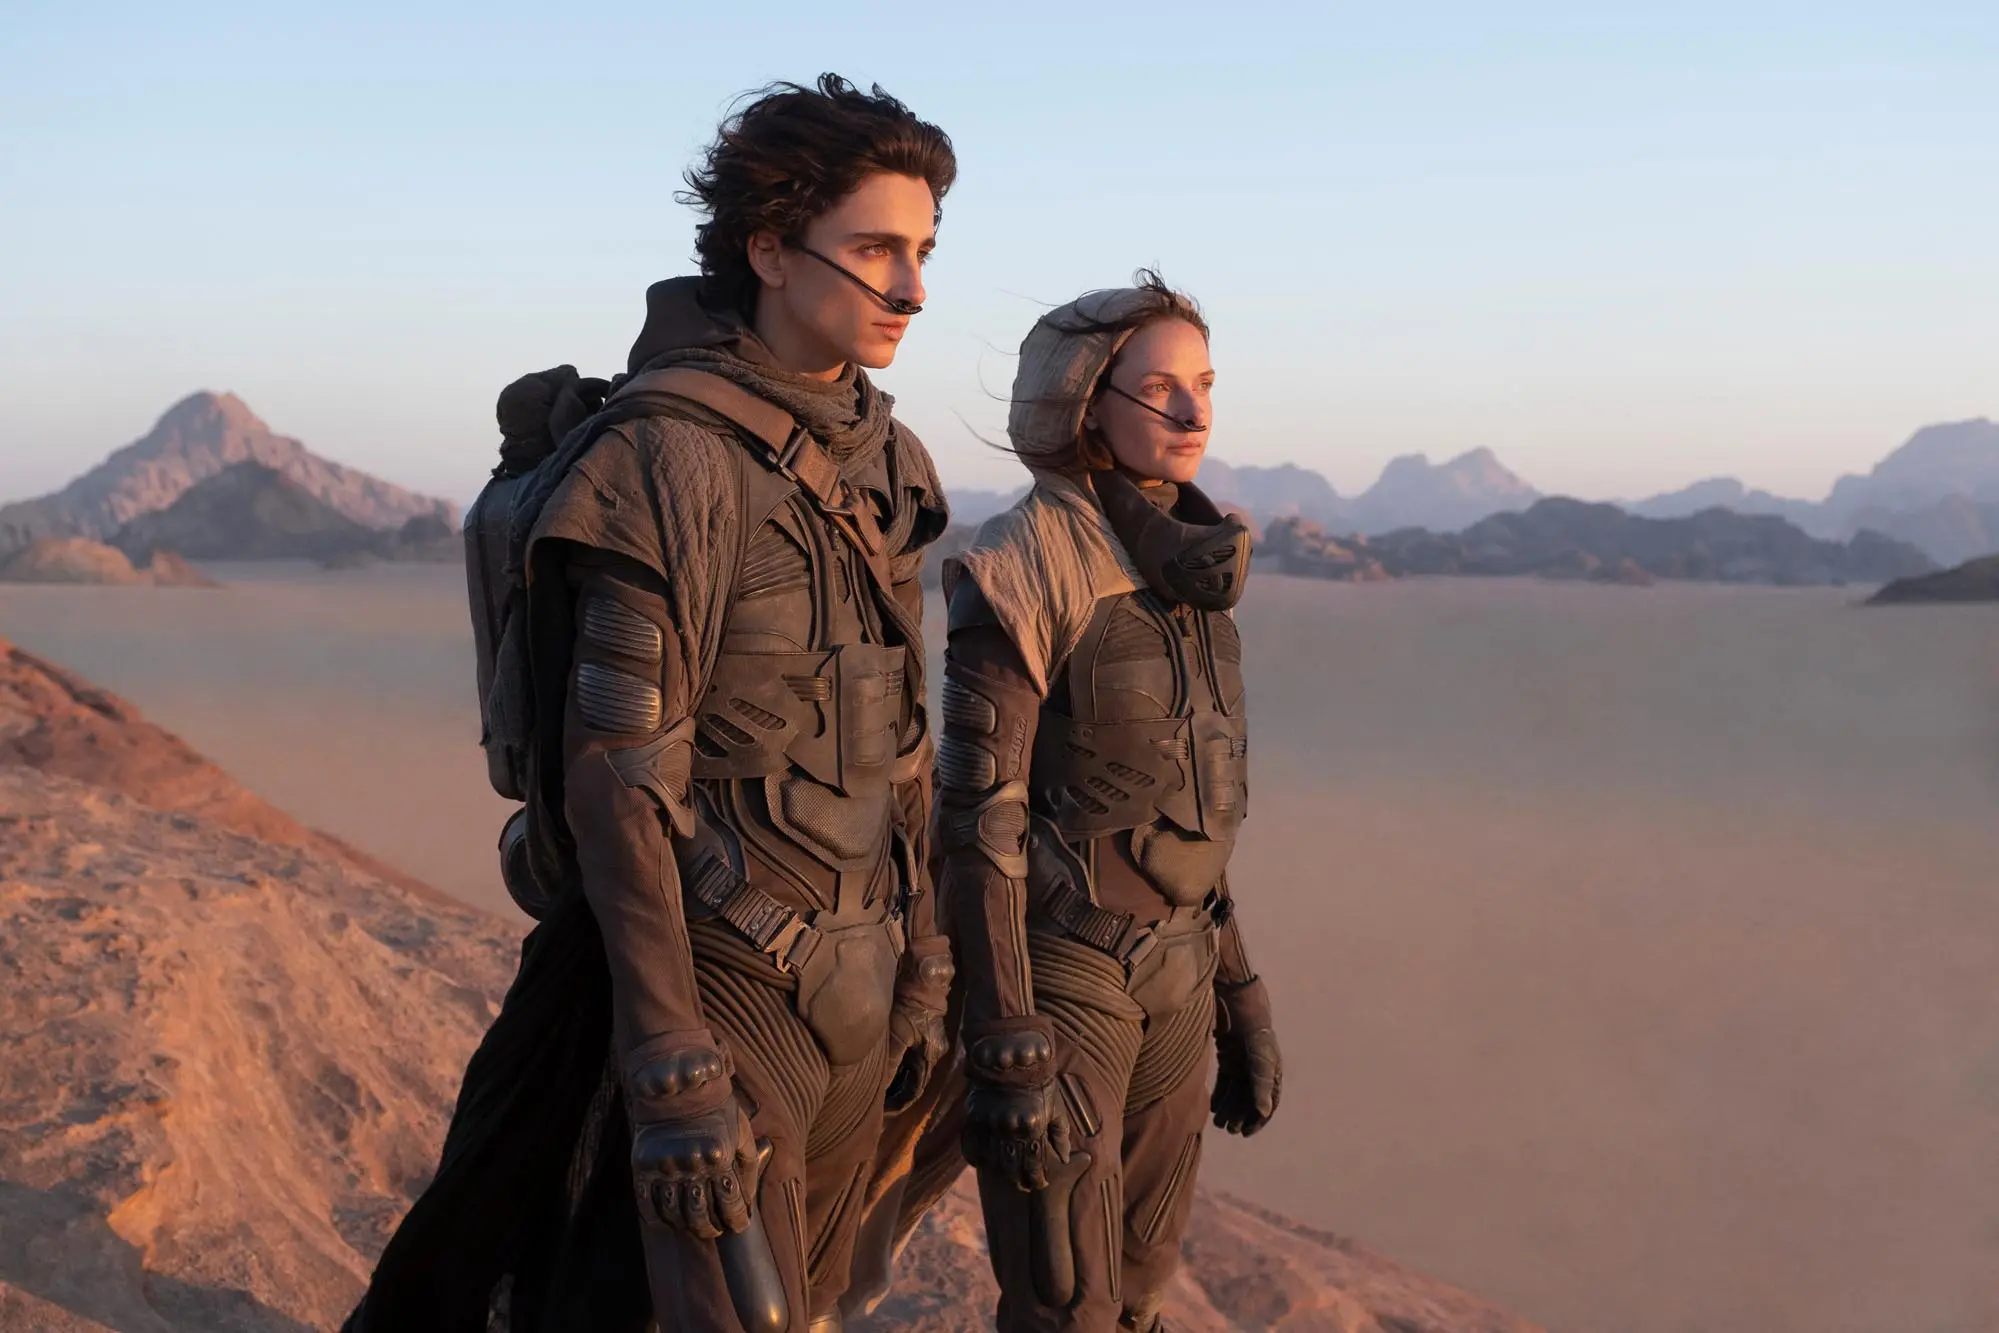 DUNE Copyright: © 2020 Warner Bros. Entertainment Inc. All Rights Reserved. Photo Credit: Chiabella James Caption: (L-r) TIMOTHÉE CHALAMET as Paul Atreides and REBECCA FERGUSON as Lady Jessica Atreides in Warner Bros. Pictures and Legendary Pictures’ action adventure “DUNE,” a Warner Bros. Pictures release.